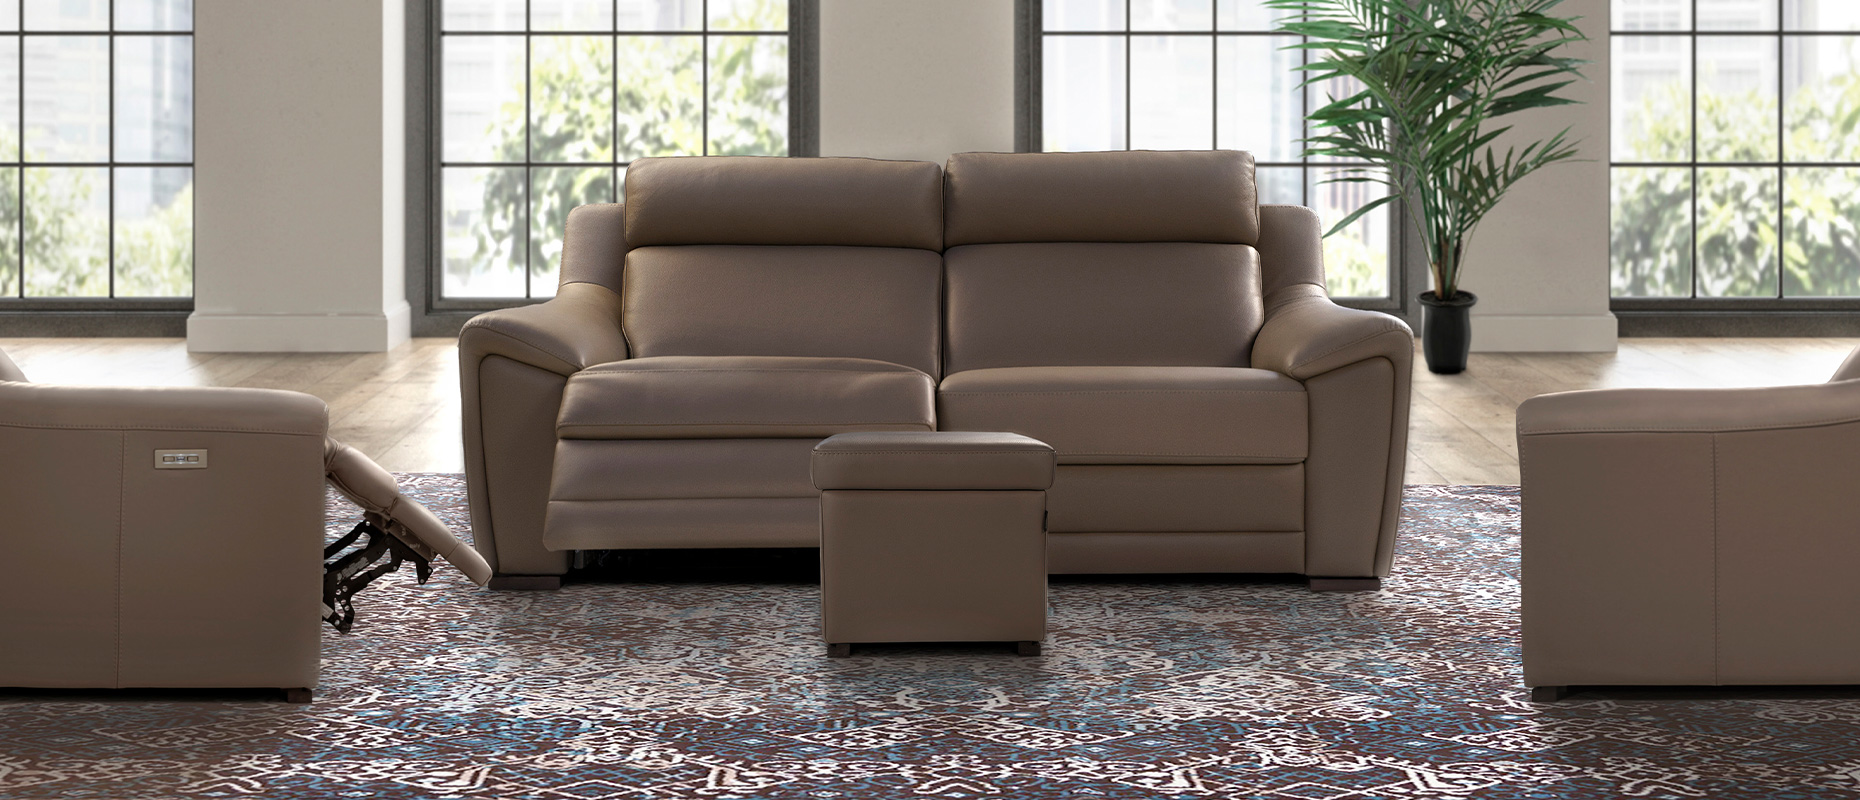 Tosca Italian Leather sofa collection at Forrest Furnishing